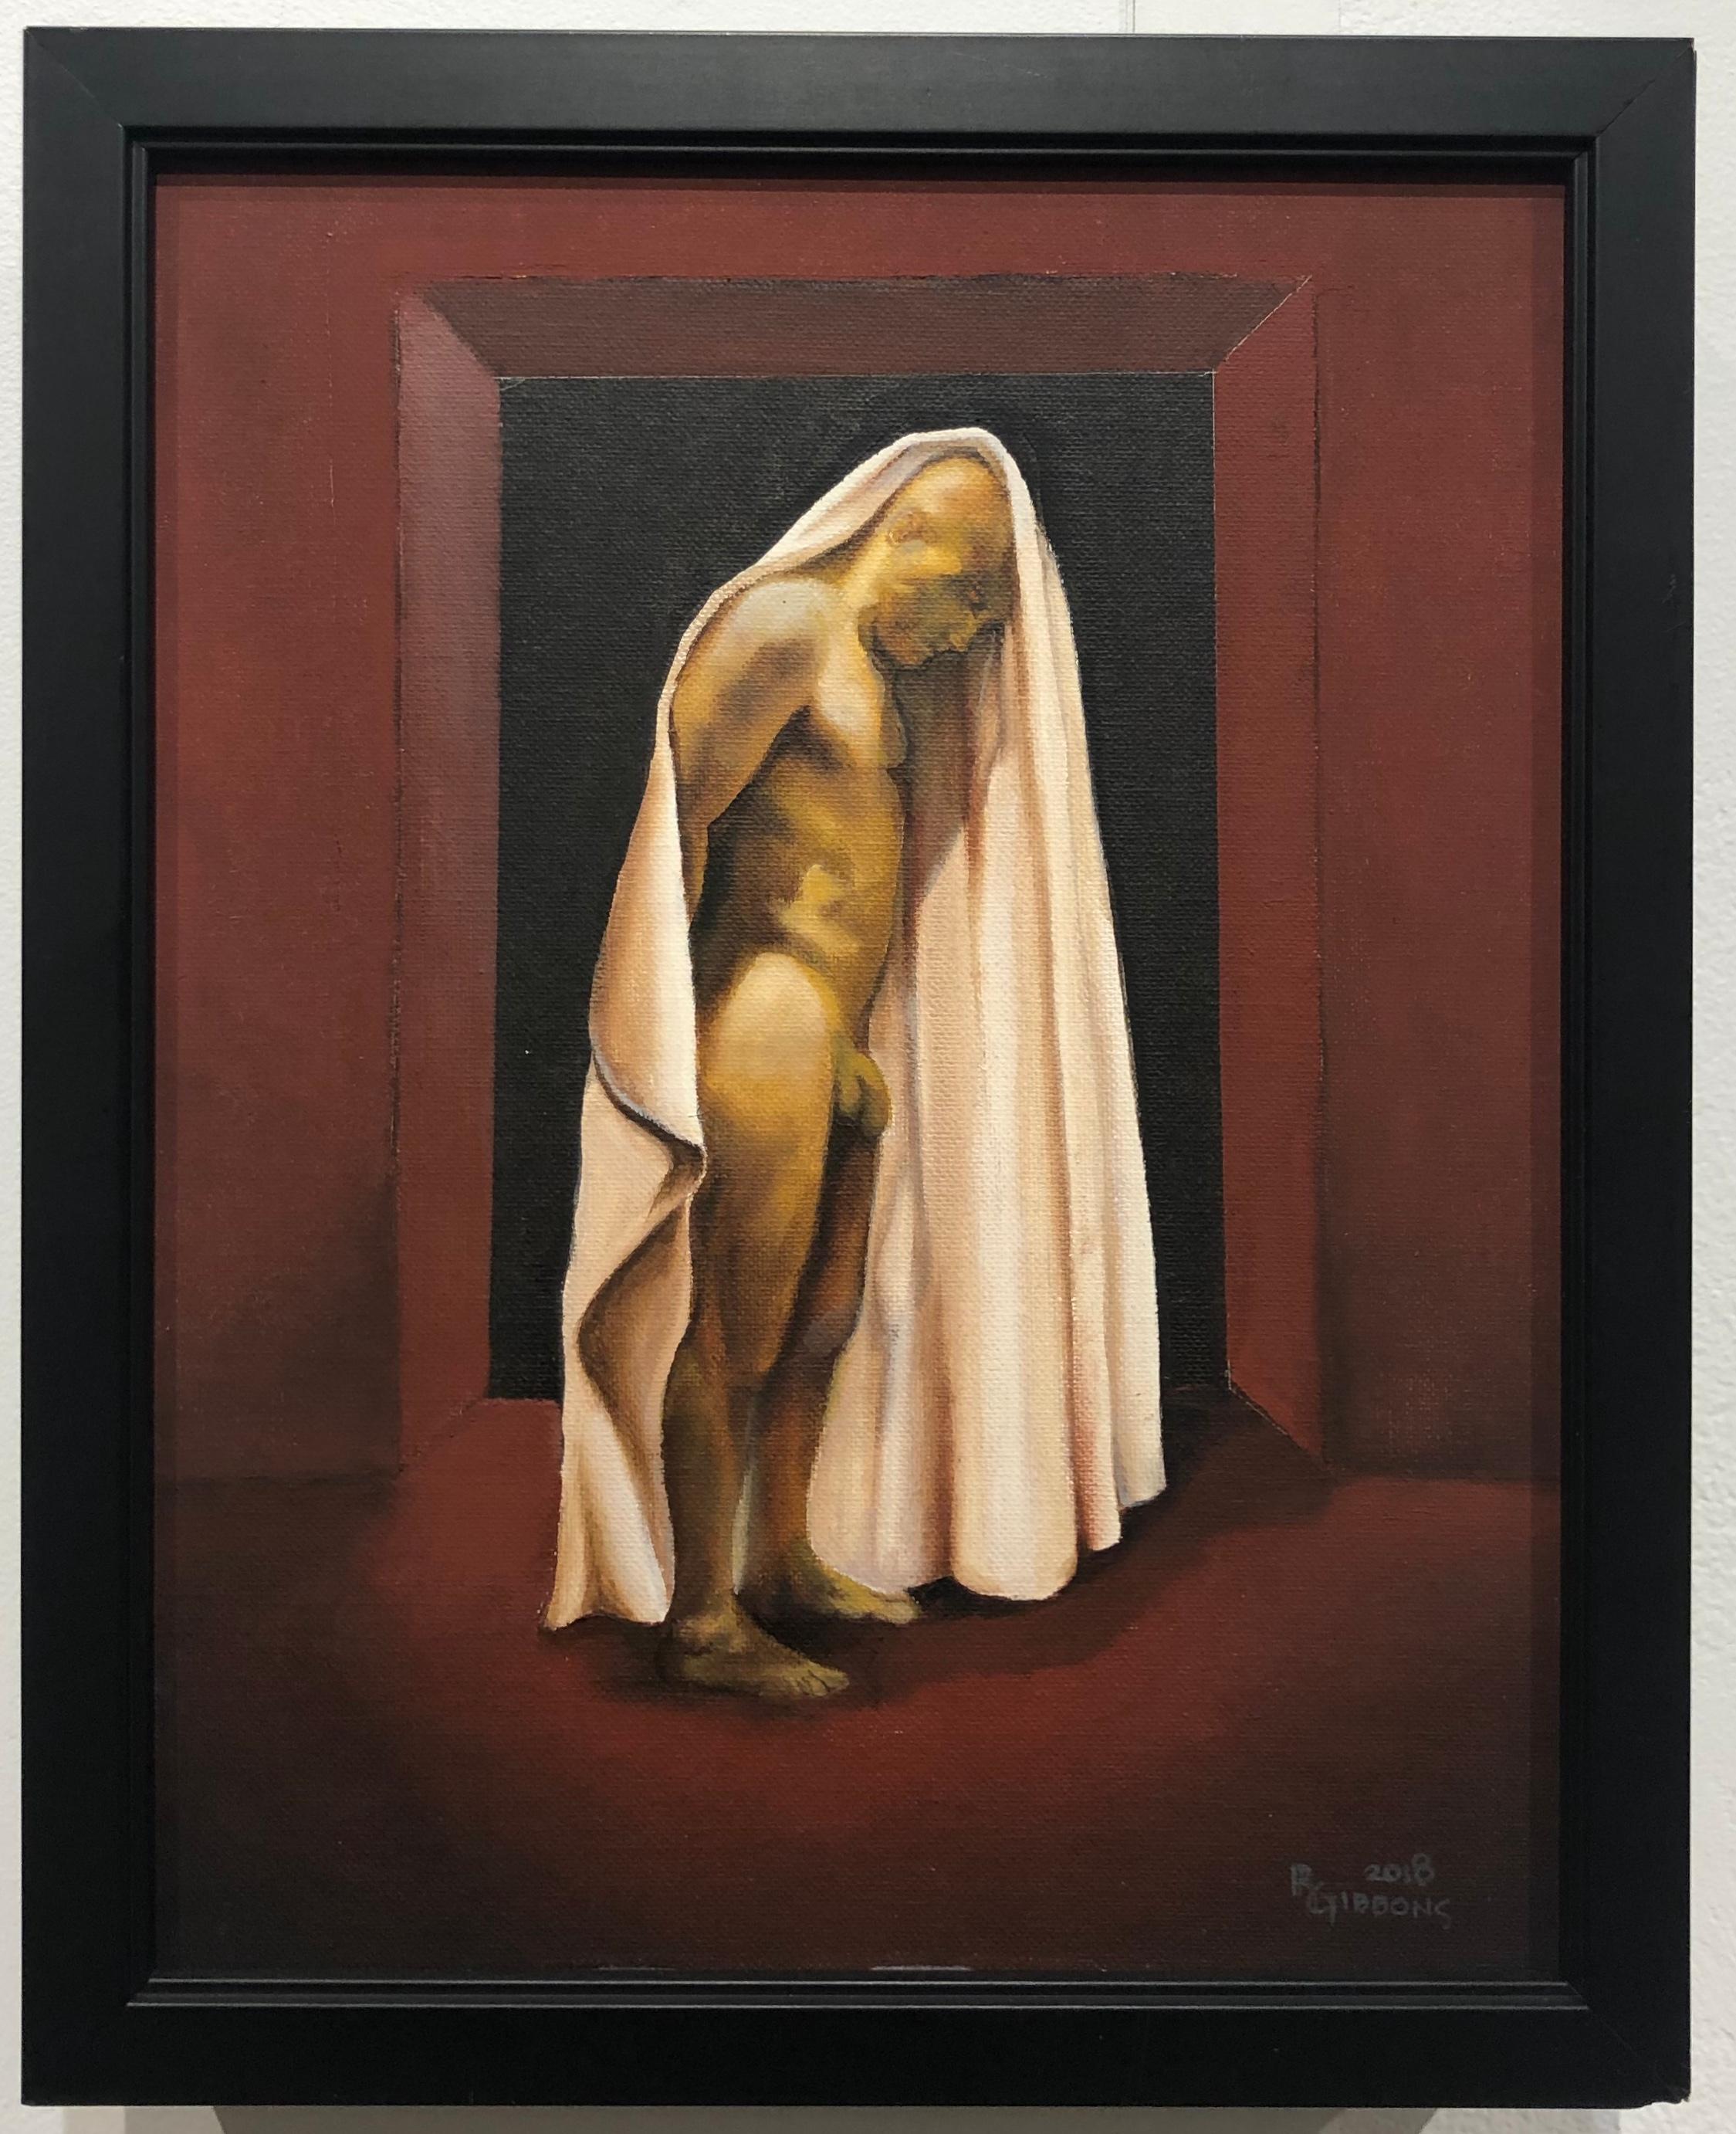 The Final Portal, Shrouded Male Nude on a Burgundy Backdrop, Oil on Panel  - Painting by Richard Gibbons